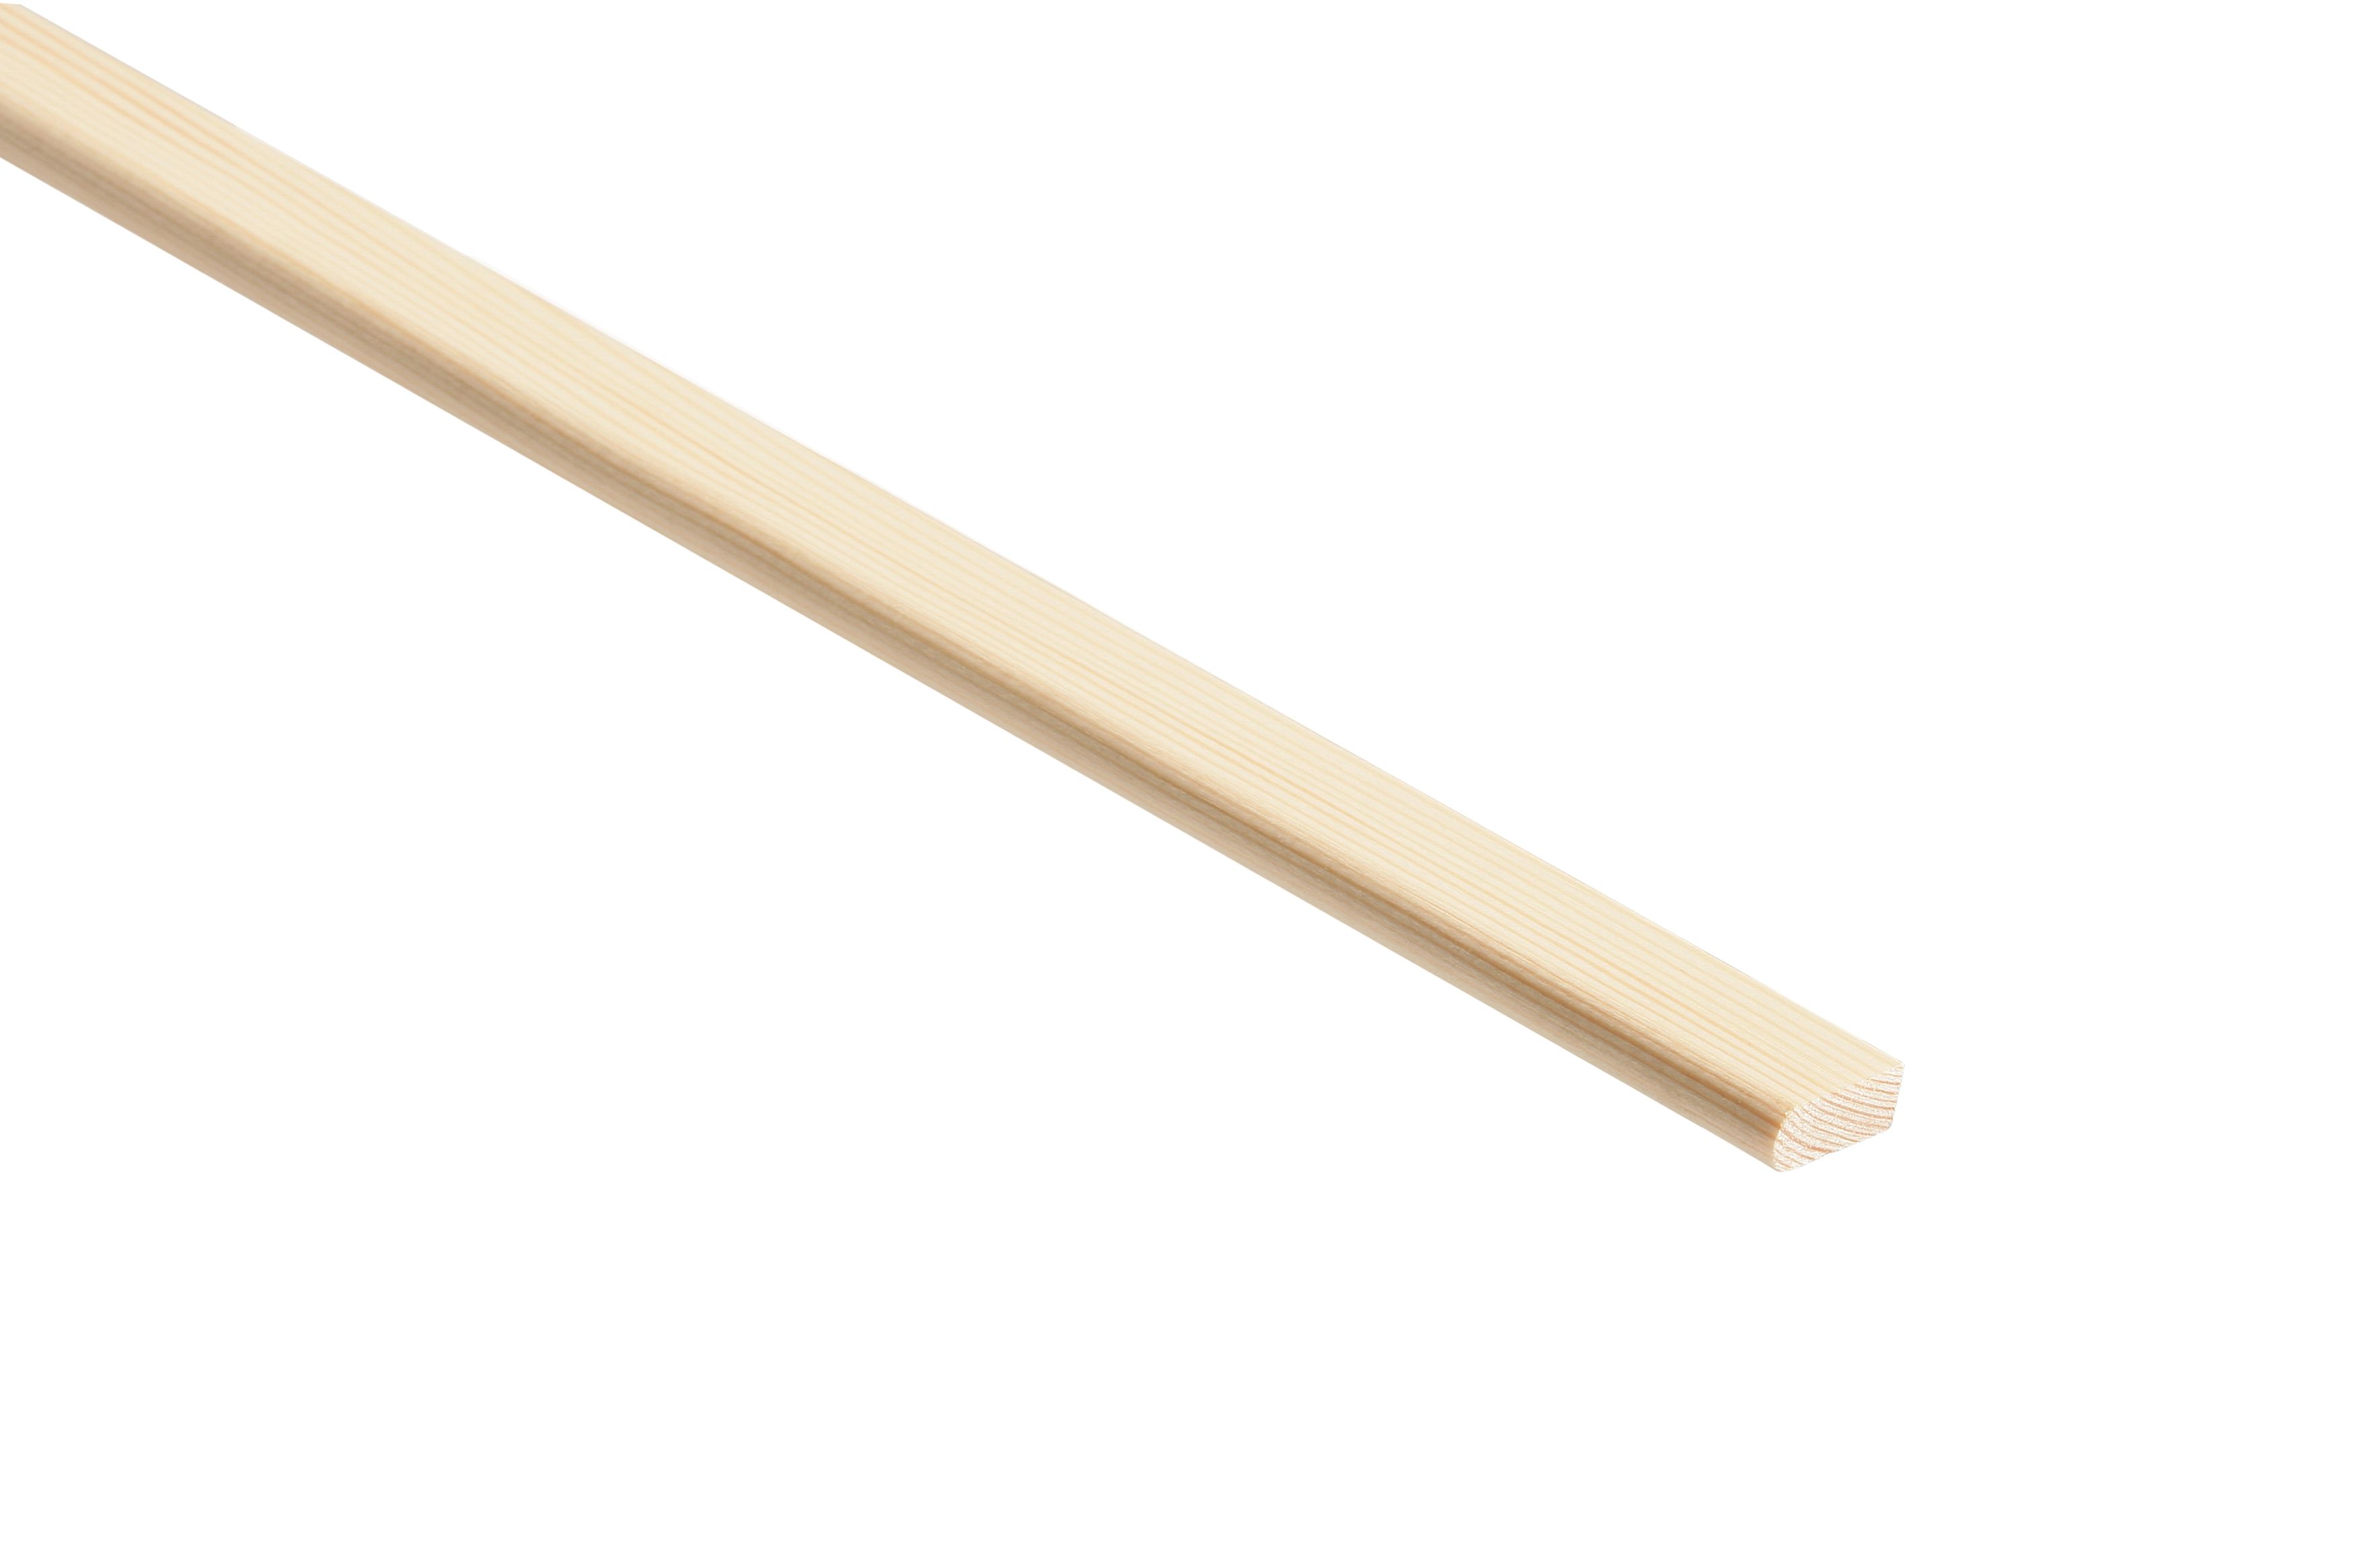 Wickes Pine Parting Bead Moulding - 20 x 8 x 2400mm | Wickes.co.uk